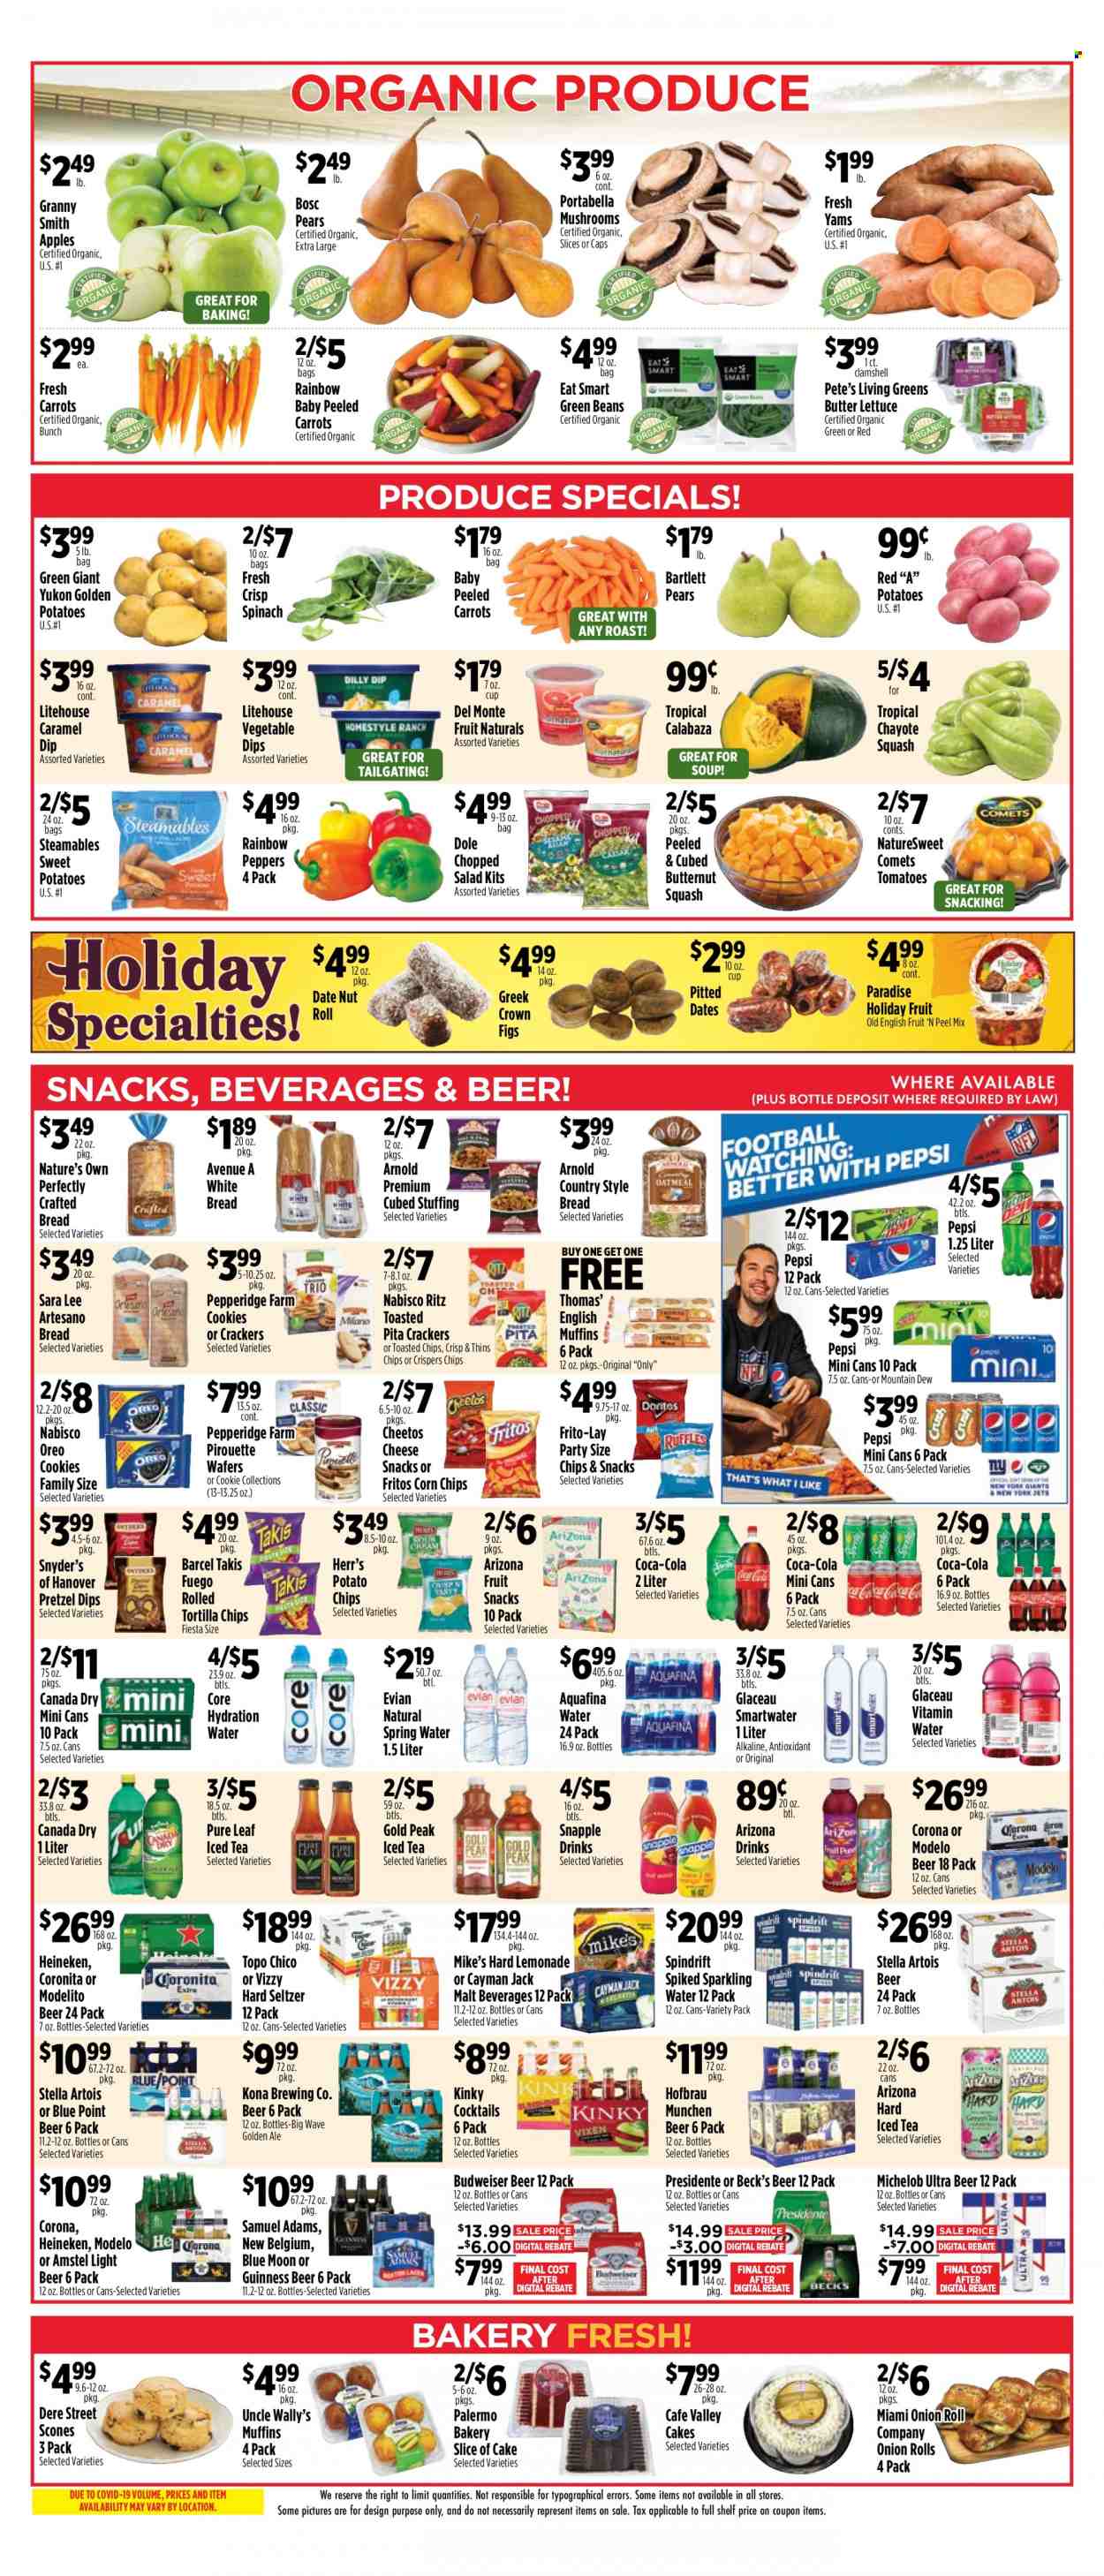 thumbnail - Pioneer Supermarkets Flyer - 11/27/2022 - 12/03/2022 - Sales products - mushrooms, bread, english muffins, white bread, pita, pretzels, cake, Sara Lee, beans, butter lettuce, carrots, green beans, sweet potato, tomatoes, lettuce, Dole, peppers, chopped salad, chayote squash, apples, Bartlett pears, figs, pears, chayote, Granny Smith, soup, cheese, Oreo, cookies, wafers, crackers, fruit snack, RITZ, Fritos, tortilla chips, potato chips, Cheetos, chips, Thins, corn chips, Frito-Lay, malt, Del Monte, caramel, dried fruit, dried dates, dried figs, Canada Dry, Coca-Cola, lemonade, Mountain Dew, Pepsi, ice tea, AriZona, Snapple, Spindrift, Aquafina, spring water, sparkling water, Smartwater, Evian, vitamin water, Pure Leaf, Hard Seltzer, beer, Corona Extra, Heineken, Guinness, Beck's, Modelo, WAVE, Budweiser, butternut squash, Stella Artois, Blue Moon, Michelob. Page 6.